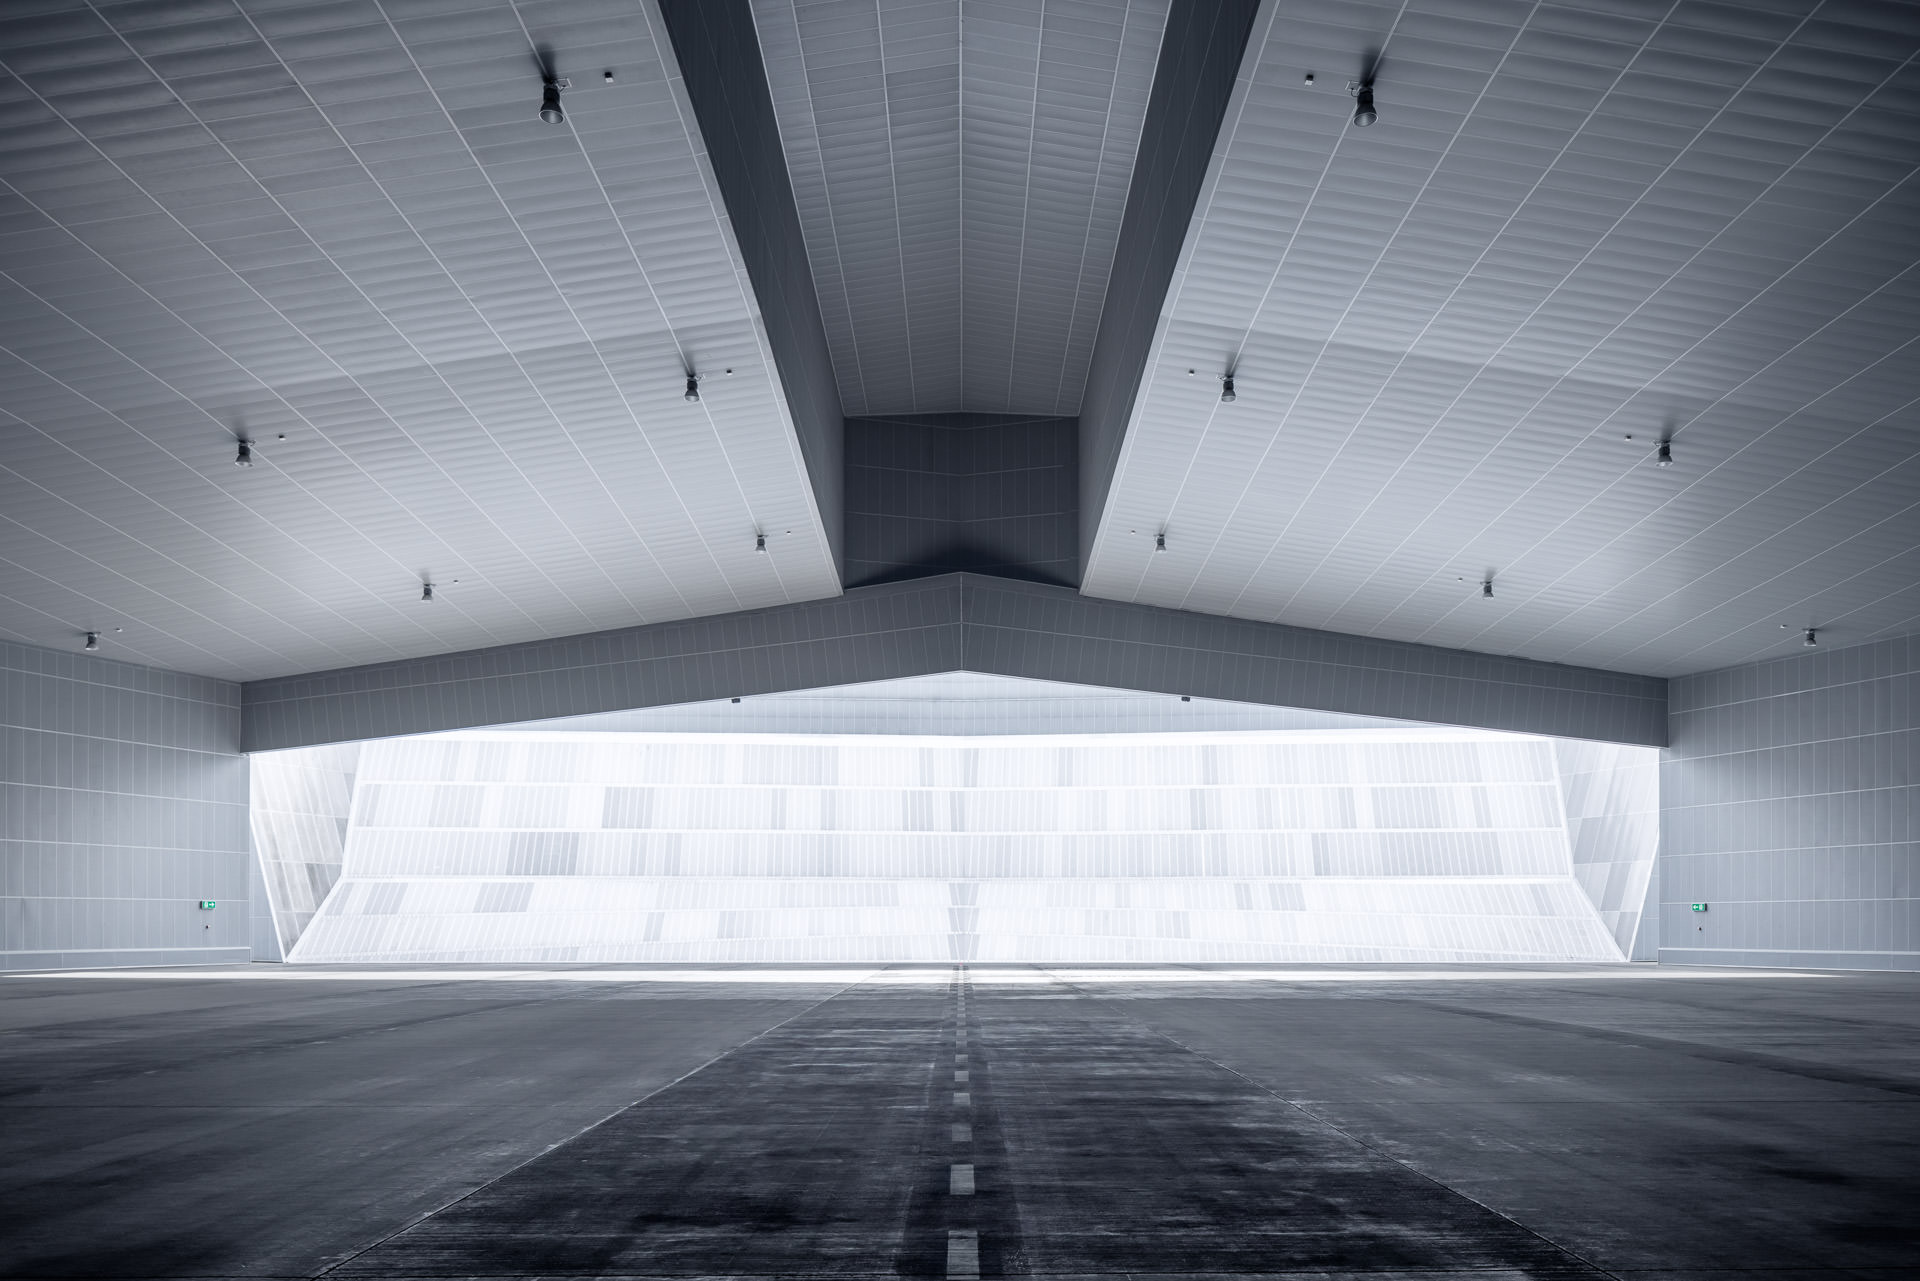 Image campaign and concept photos: Noise protection hangar at ZRH airport Zurich, Switzerland